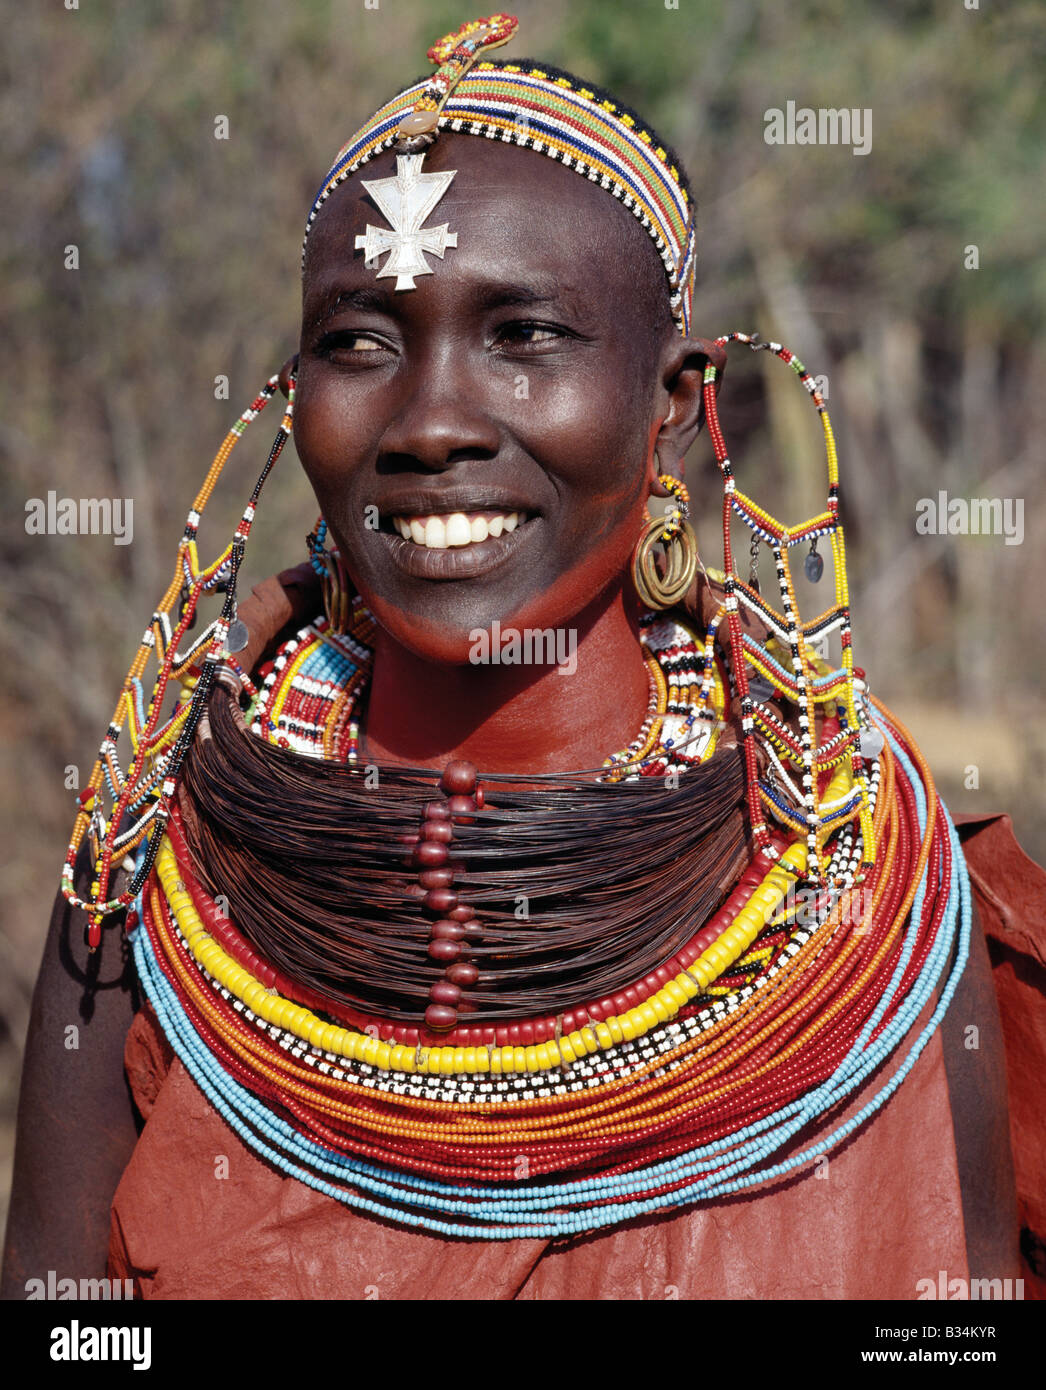 Kenya, Samburu district, Kirimun. A Samburu woman wearing a mporro necklace, which signifies her married status.These necklaces, once made of hair from giraffe tails, are now made from fibres of doum palm fronds (Hyphaene coriacea). The beads are mid-19th century Venetian glass beads, which were introduced to Samburuland by early hunters and traders. Stock Photo